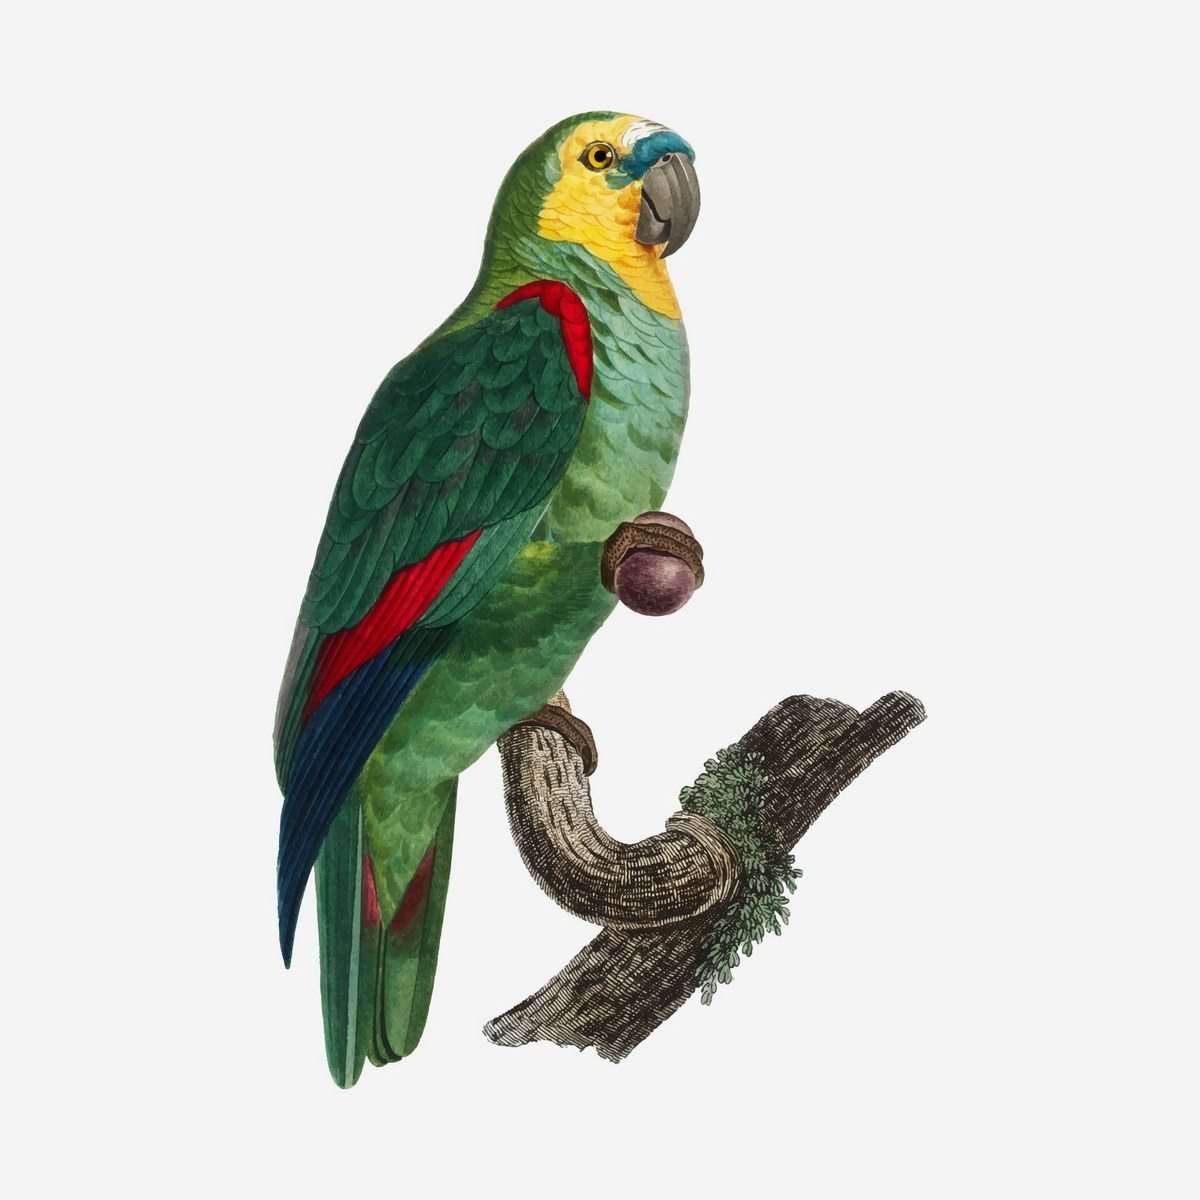 Turquoise-fronted parrot